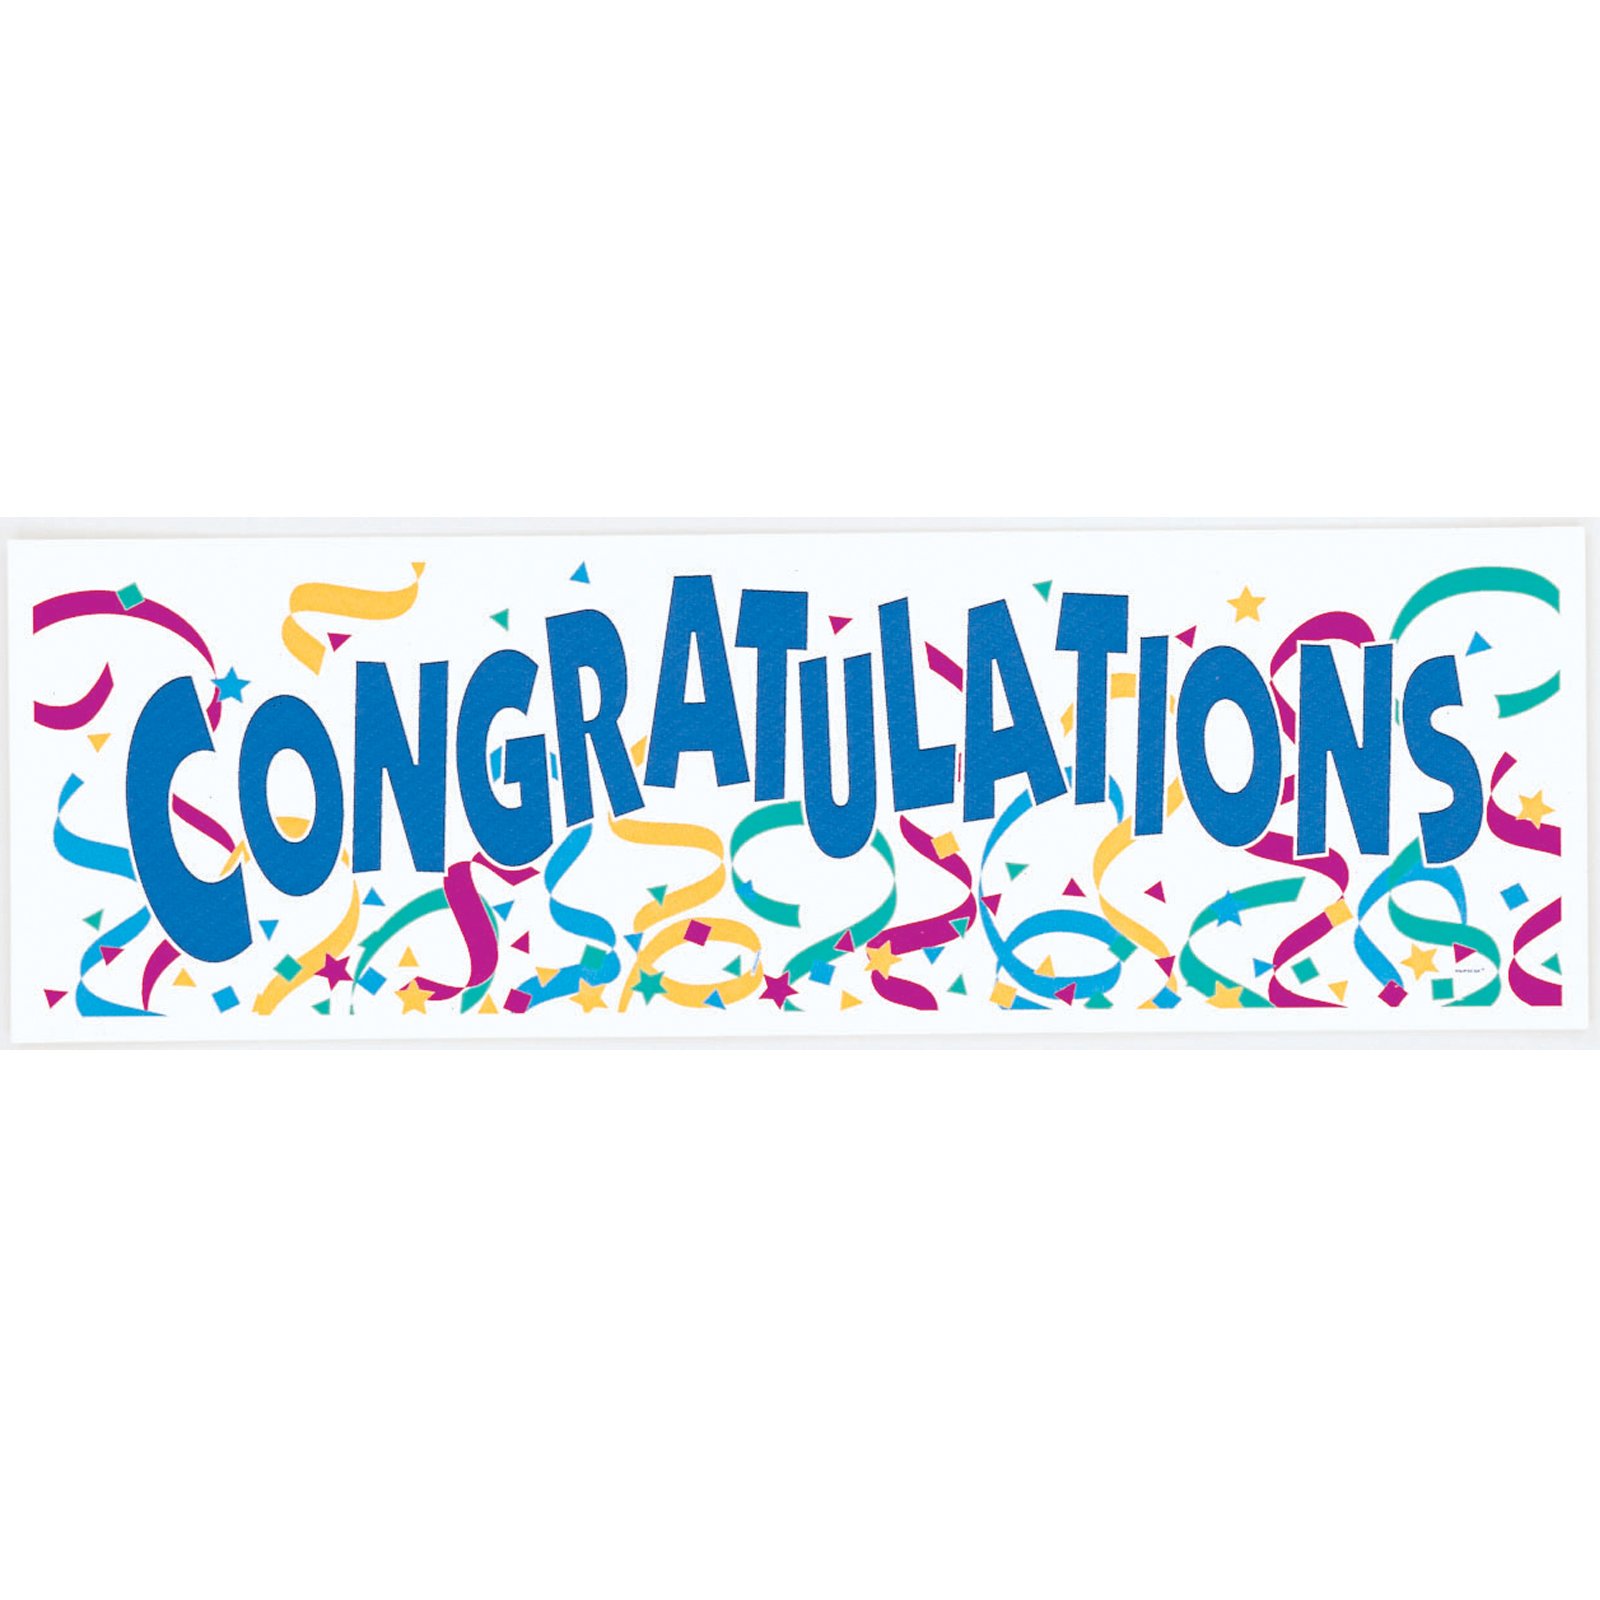 Congratulations 2 Image Png Image Clipart